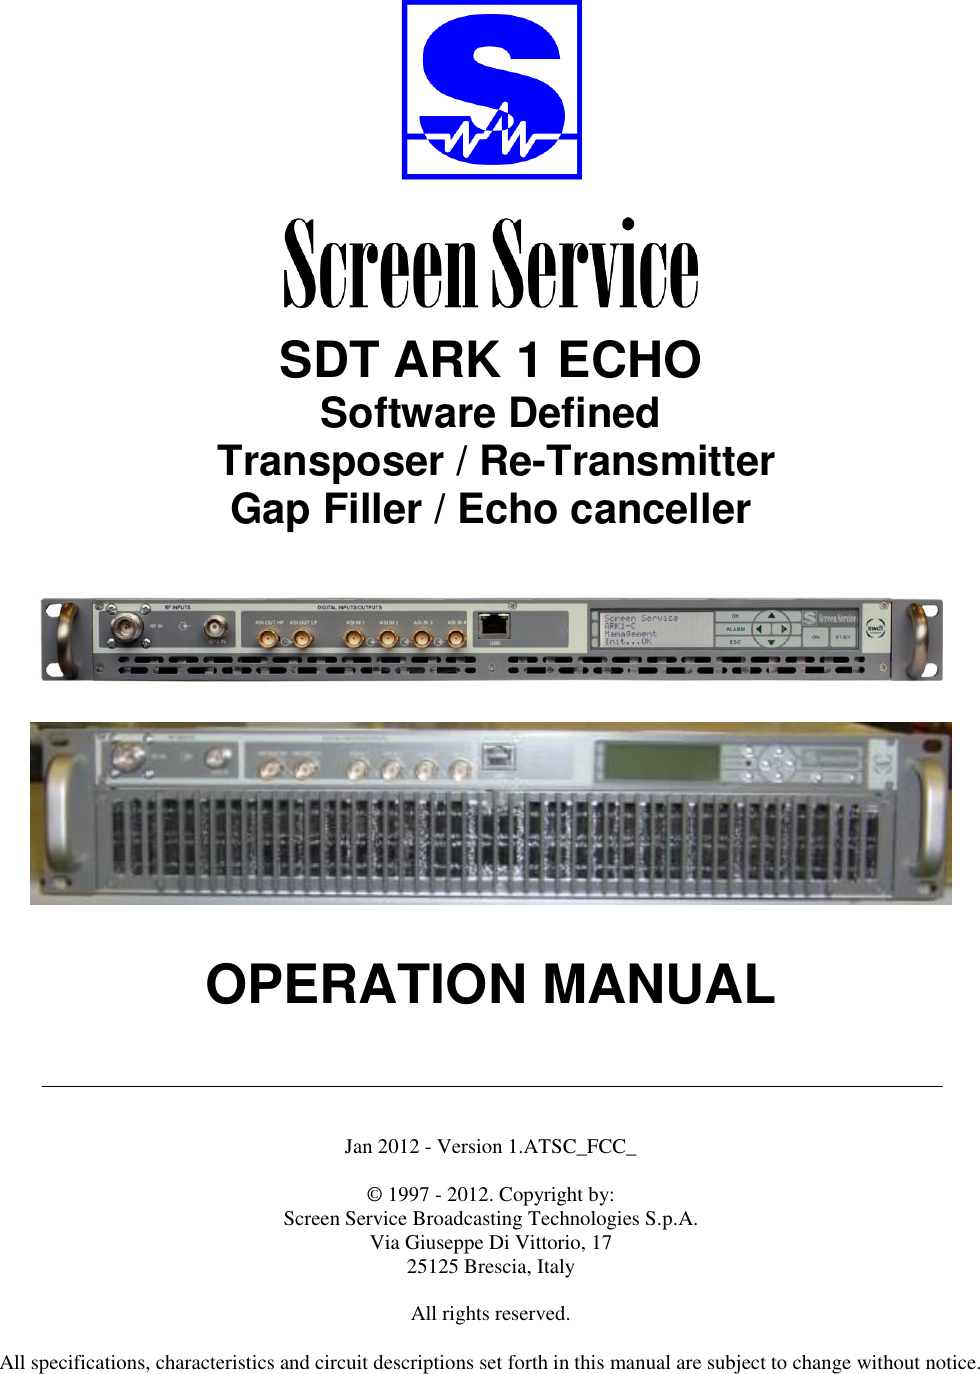     SDT ARK 1 ECHO Software Defined  Transposer / Re-Transmitter Gap Filler / Echo canceller        OPERATION MANUAL      Jan 2012 - Version 1.ATSC_FCC_  © 1997 - 2012. Copyright by:  Screen Service Broadcasting Technologies S.p.A. Via Giuseppe Di Vittorio, 17 25125 Brescia, Italy  All rights reserved.  All specifications, characteristics and circuit descriptions set forth in this manual are subject to change without notice. 